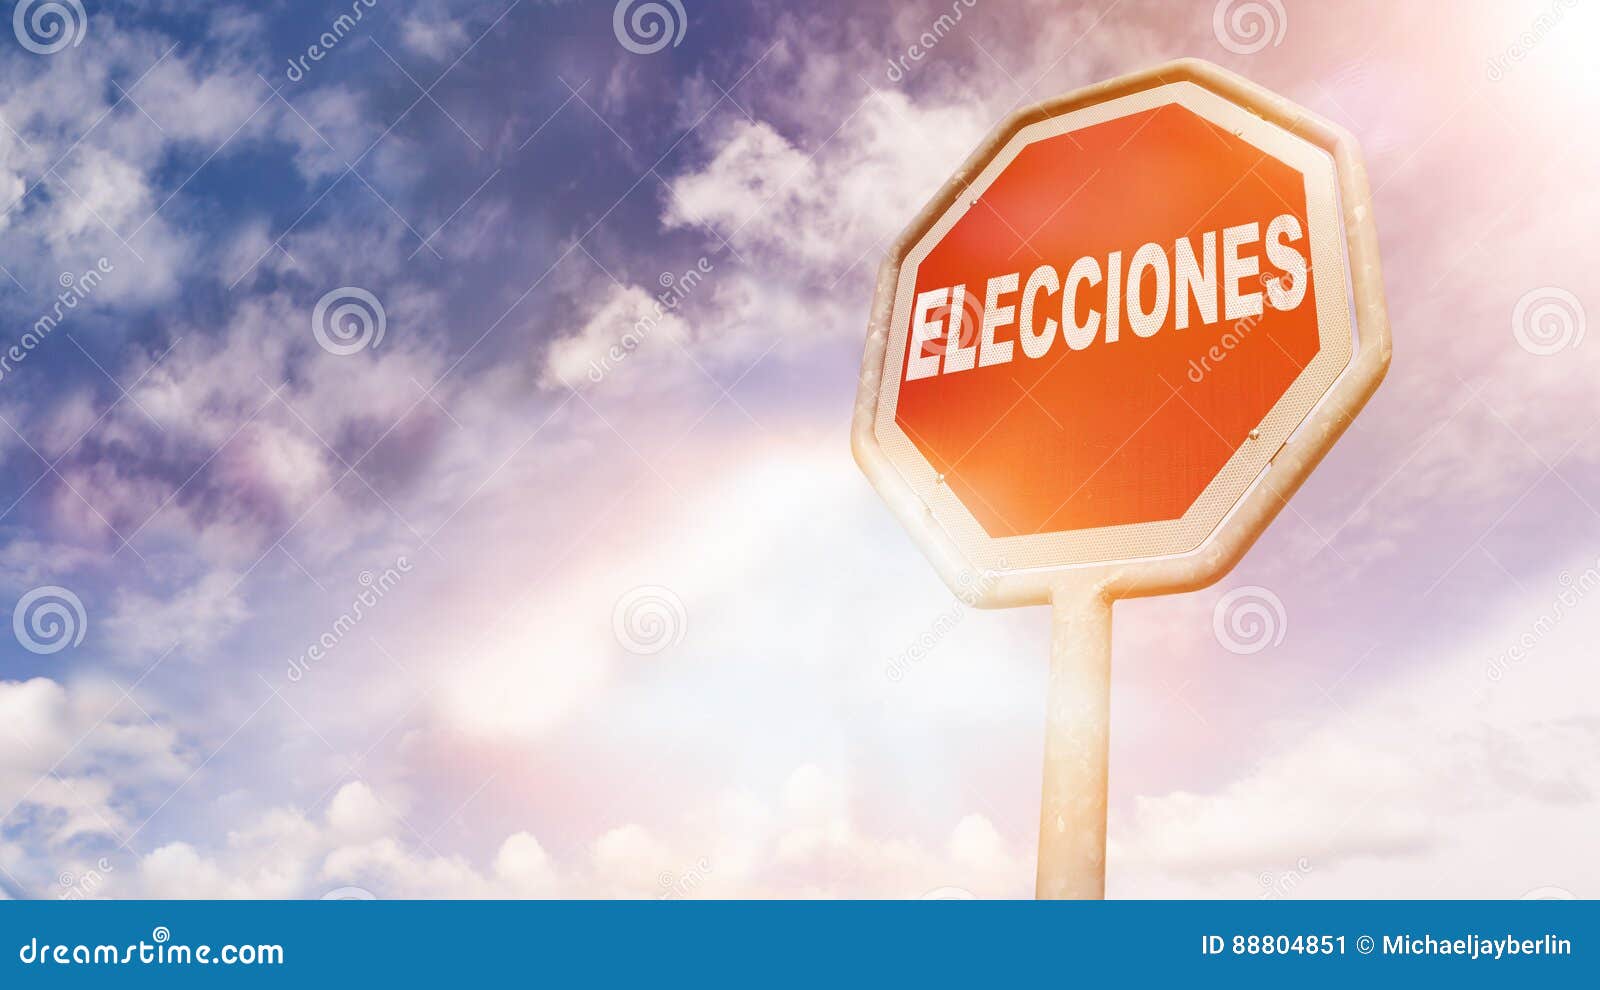 elecciones, spanish text for elections text on red traffic sign